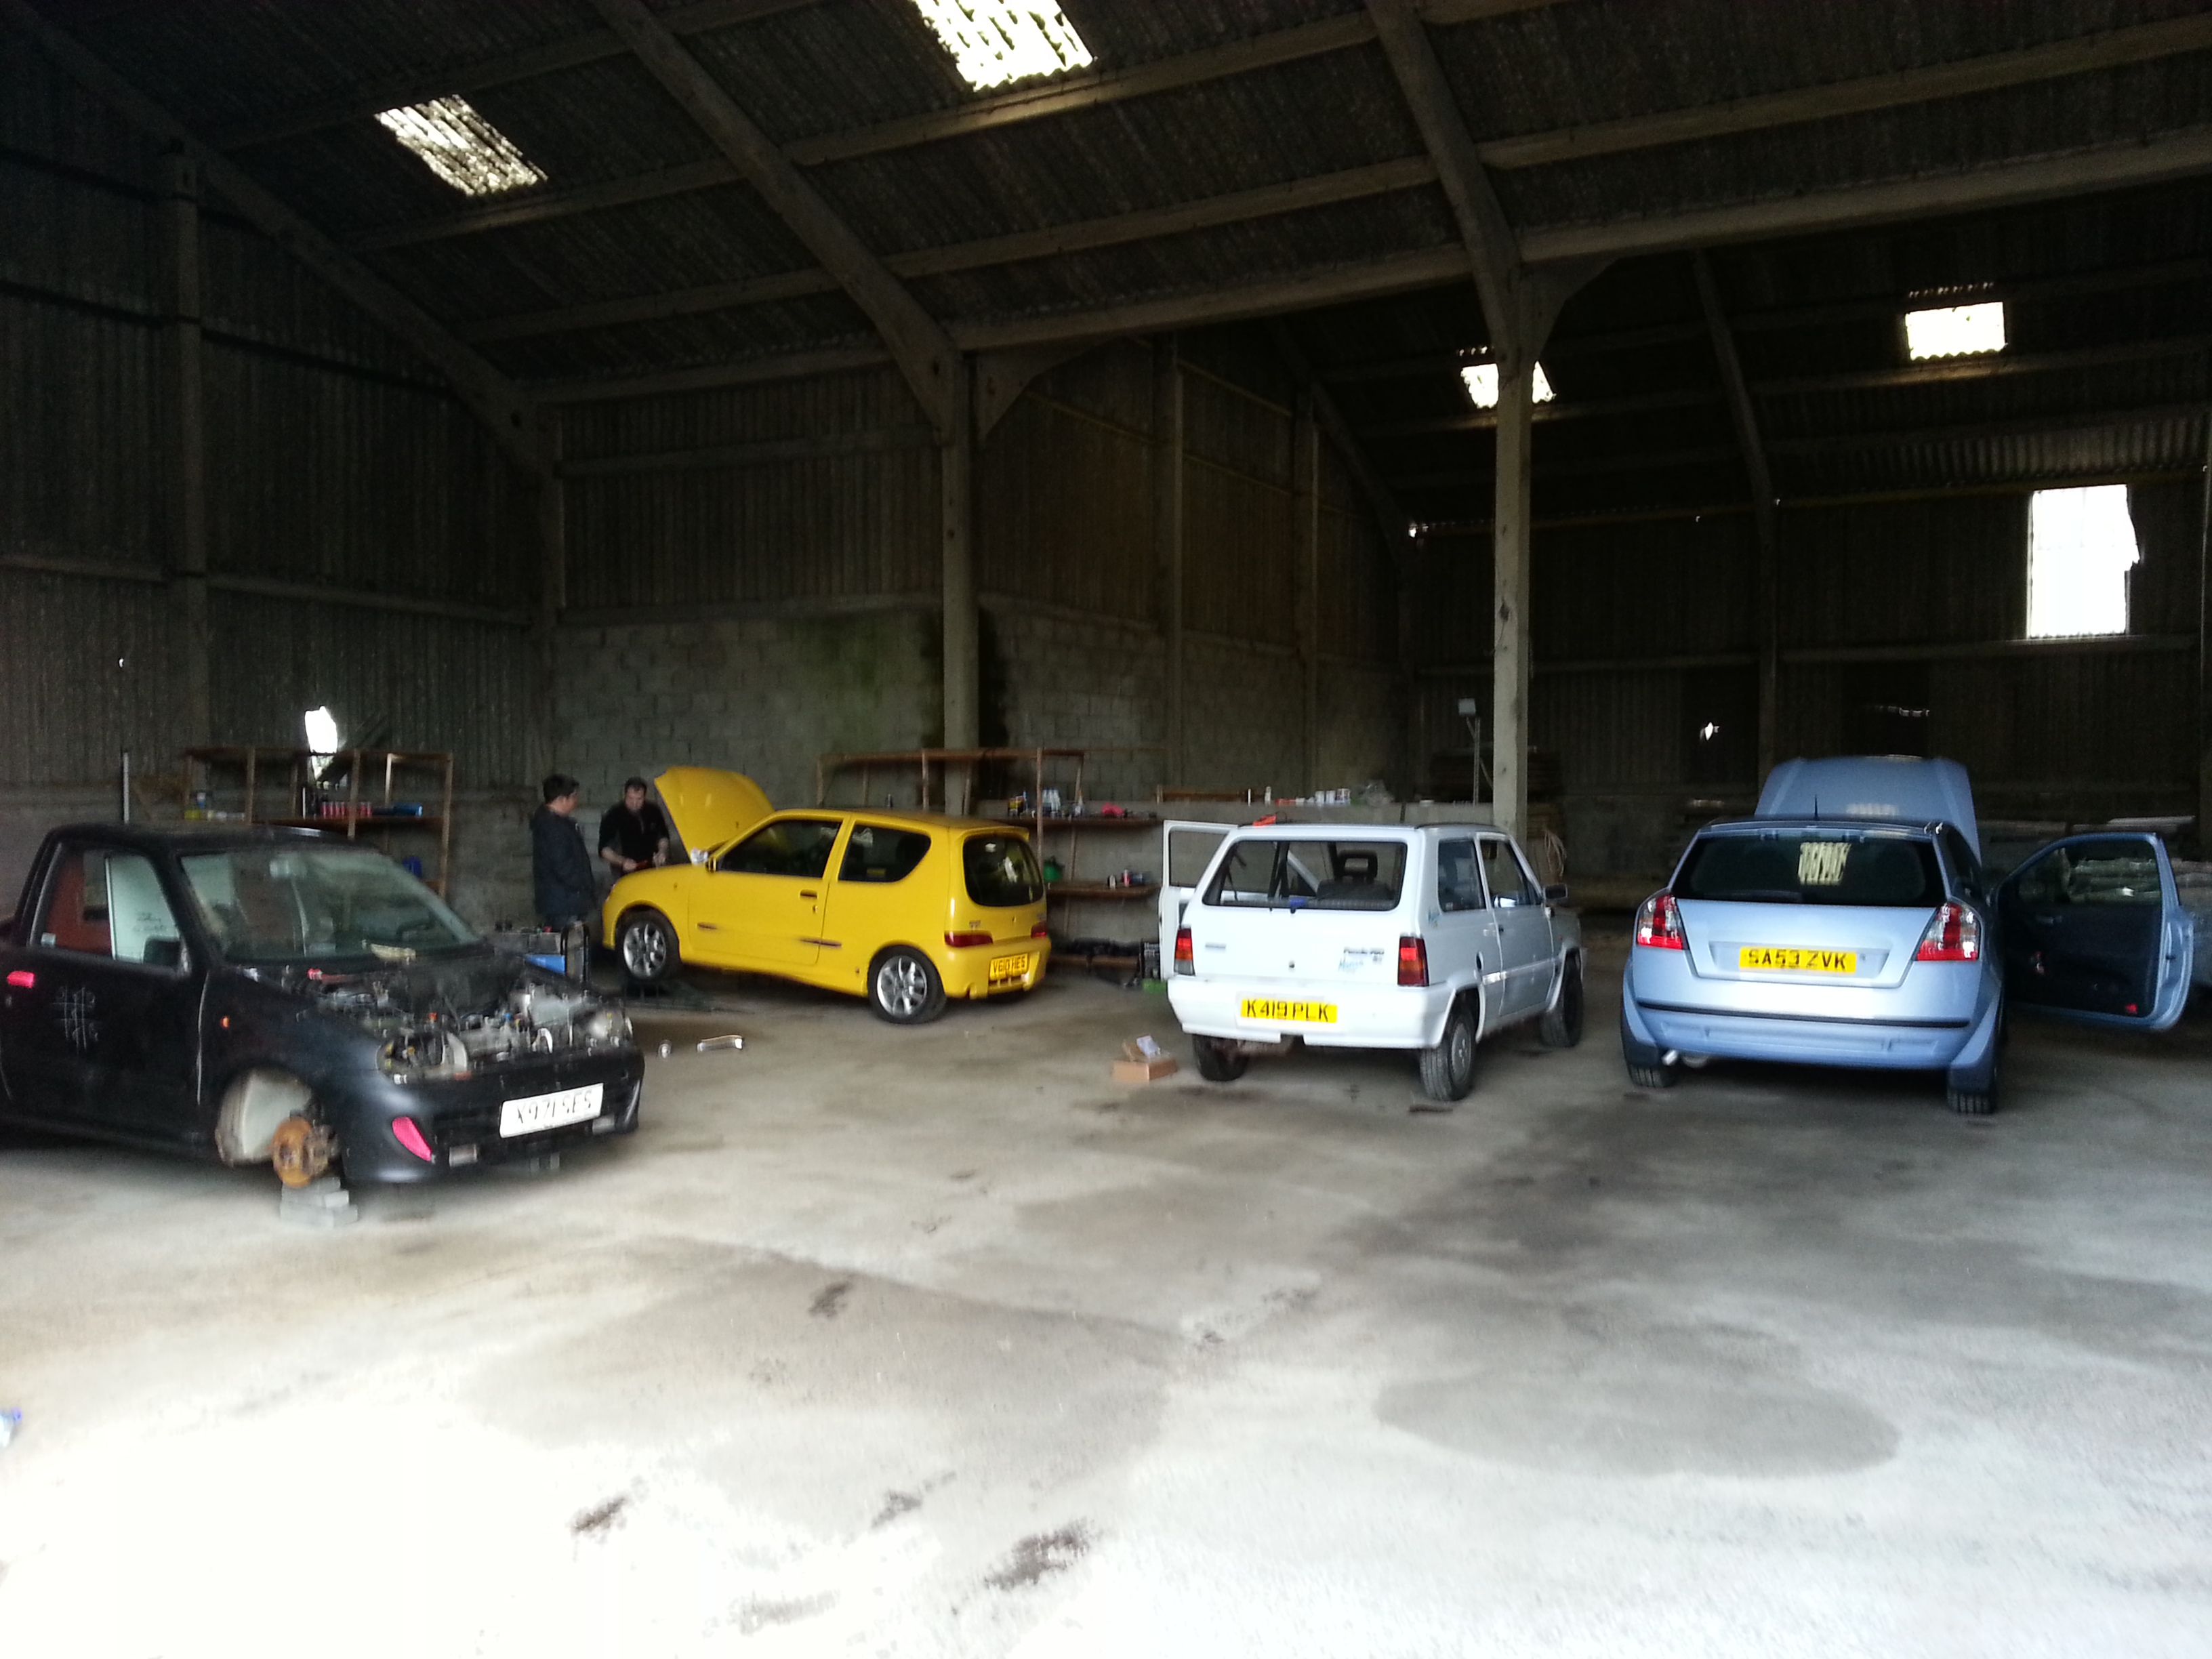 4 Fiats in the shed!